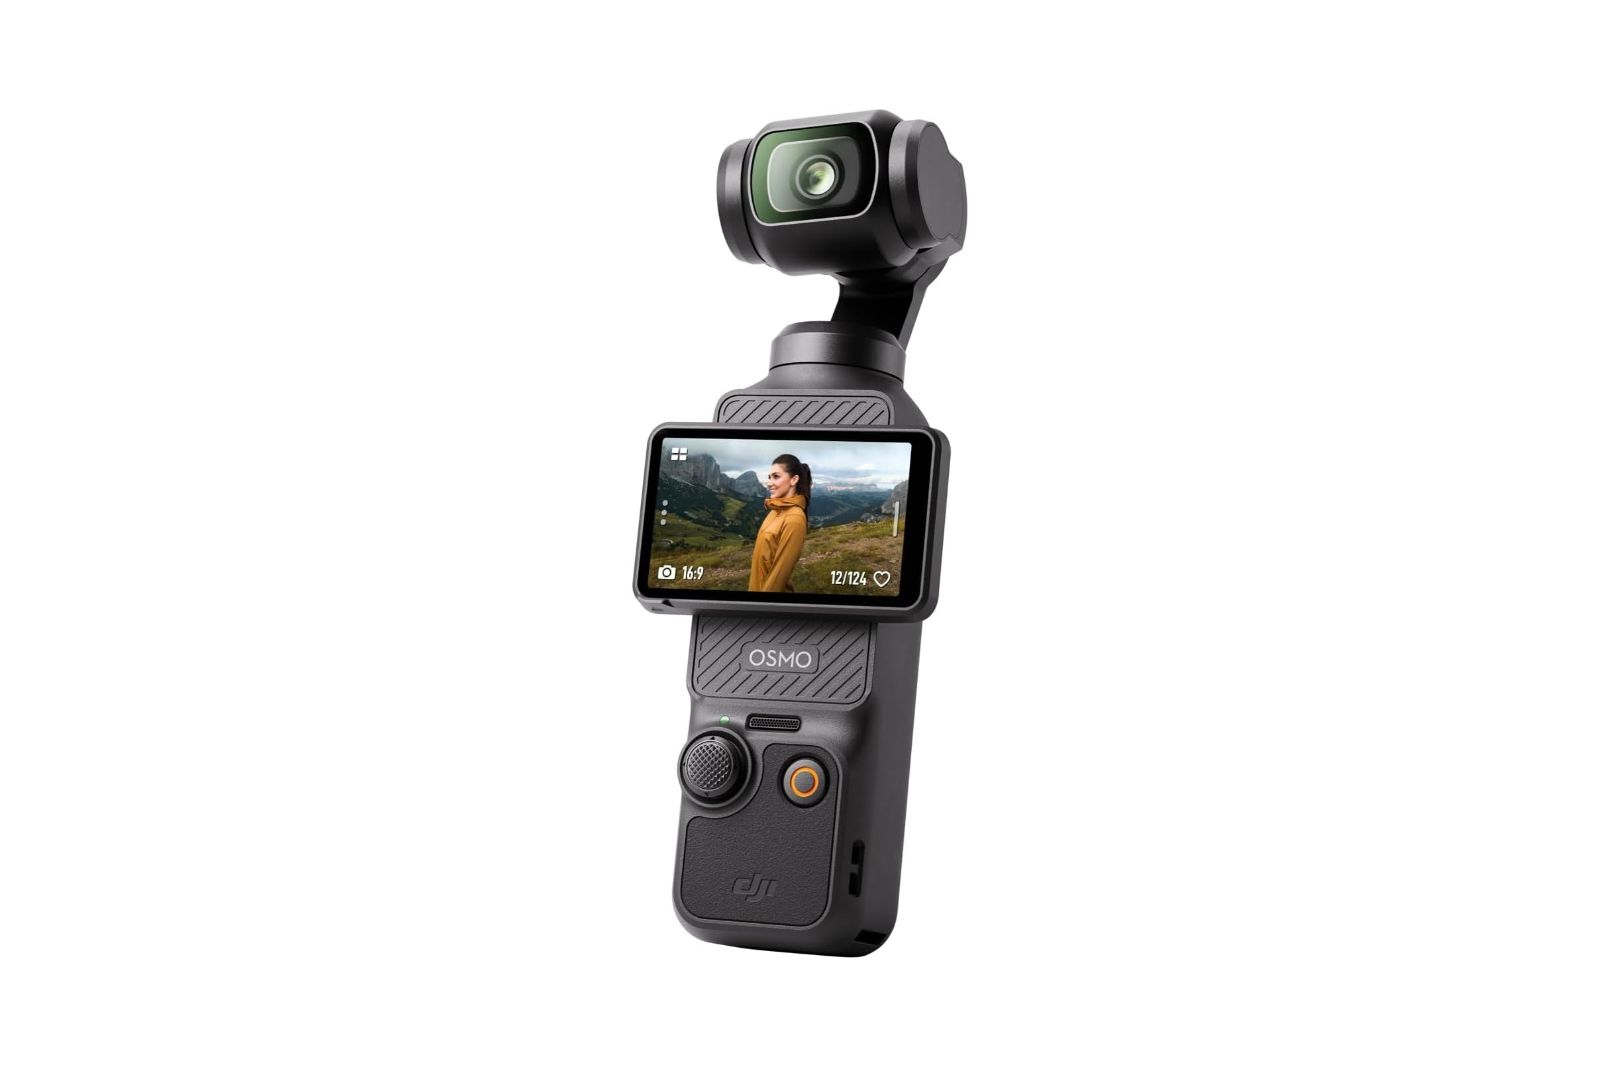 A handheld camera with a gimbal head and a rotating screen.